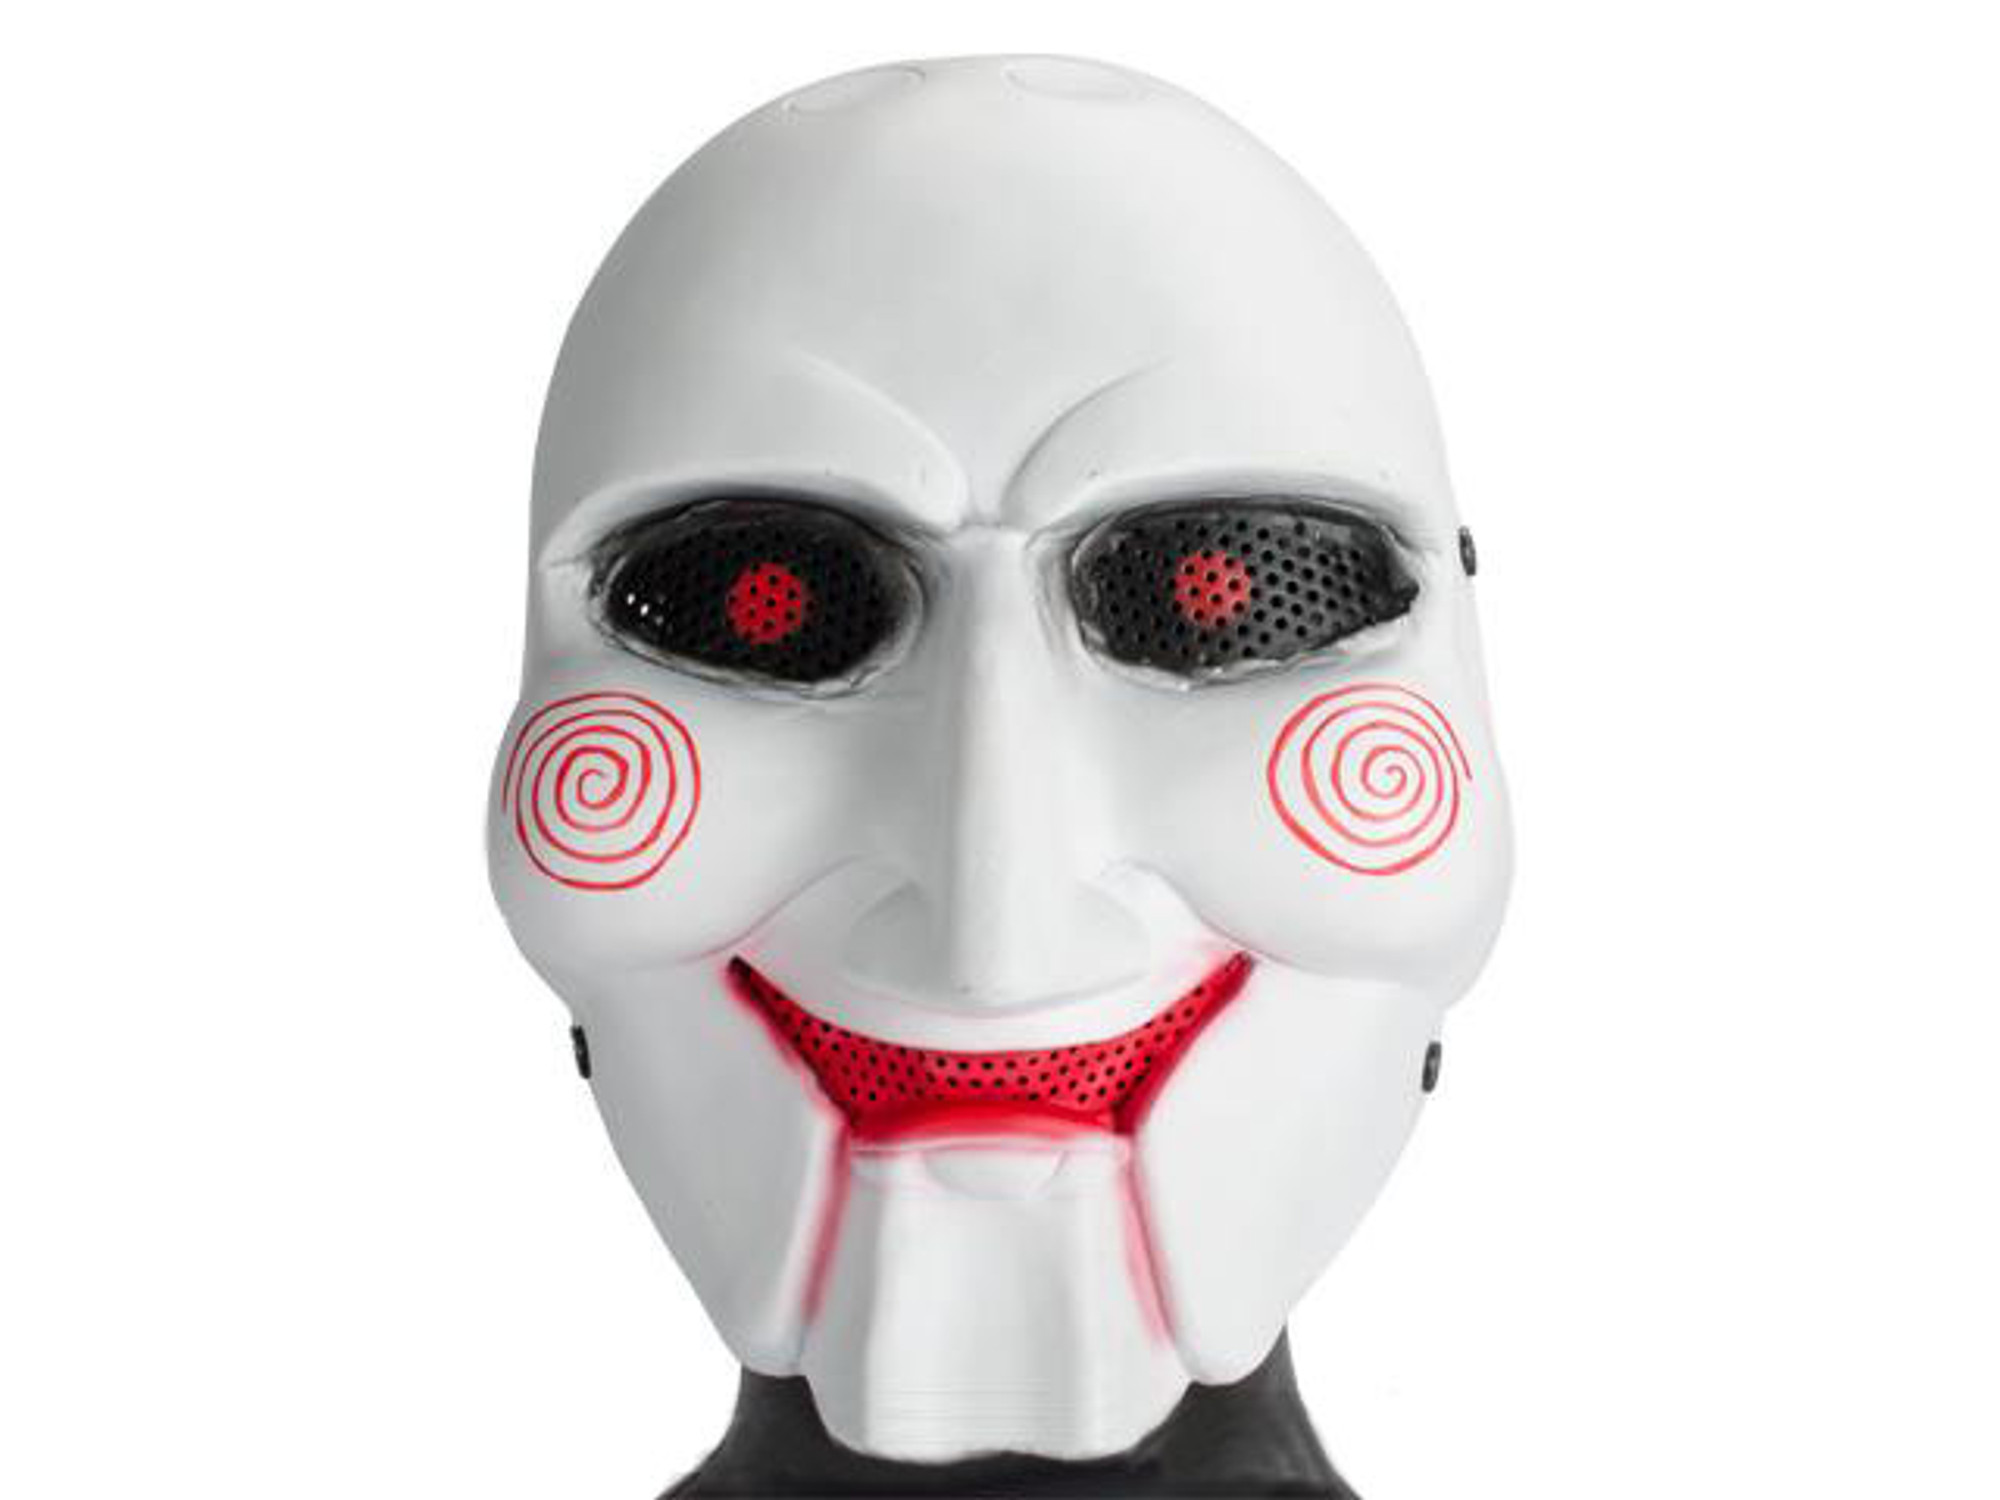 Avengers Wire Mesh "Jigsaw" Mask Inspired by SAW